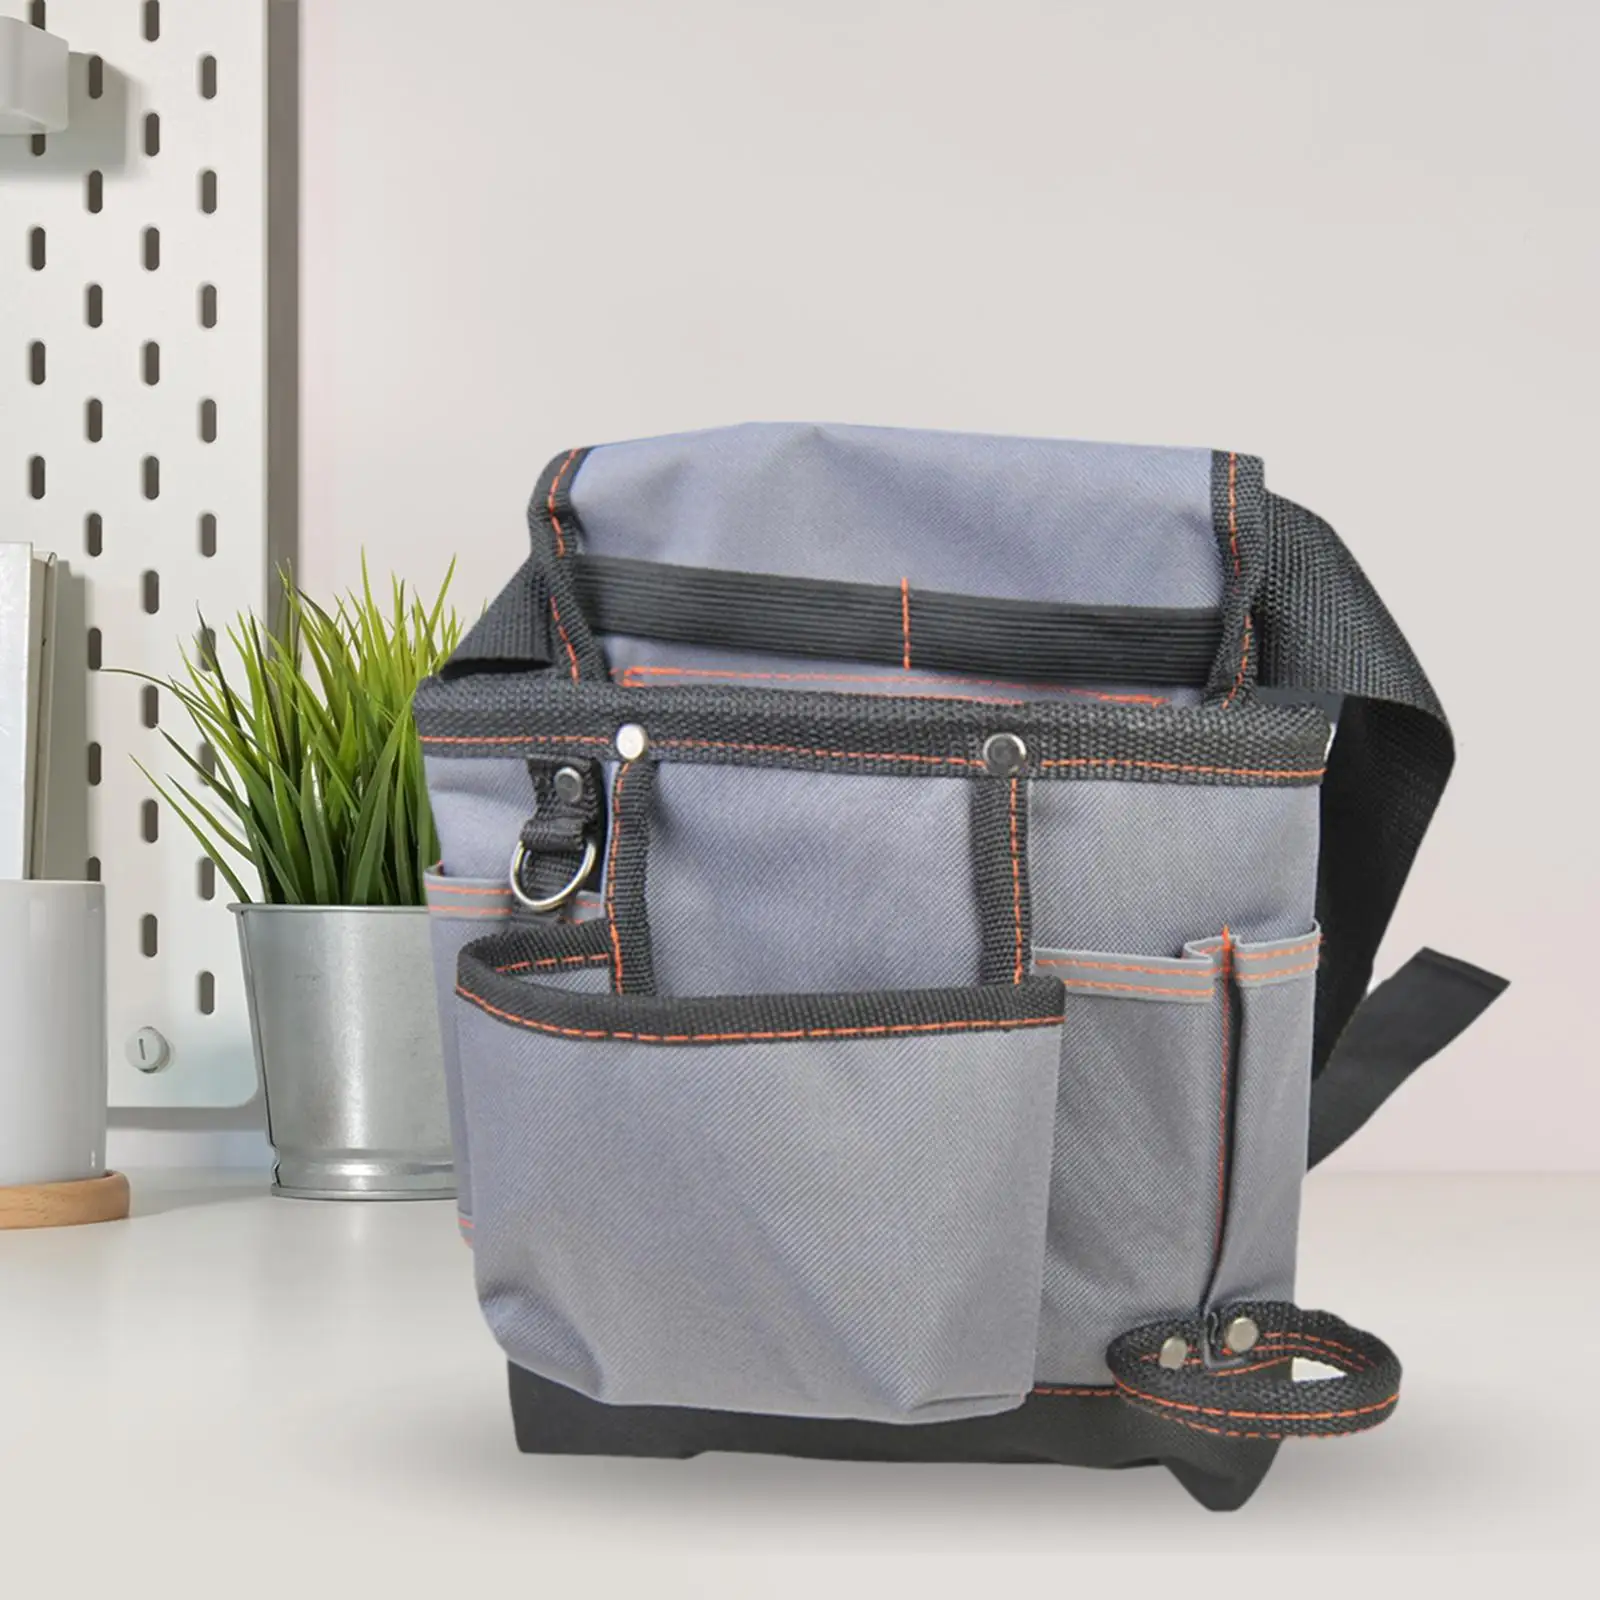 Thickened Canvas Bag with Pockets Multi Purpose Wear Resistant Portable Tool Bags for for Carpenters Tool Organizer & Storage